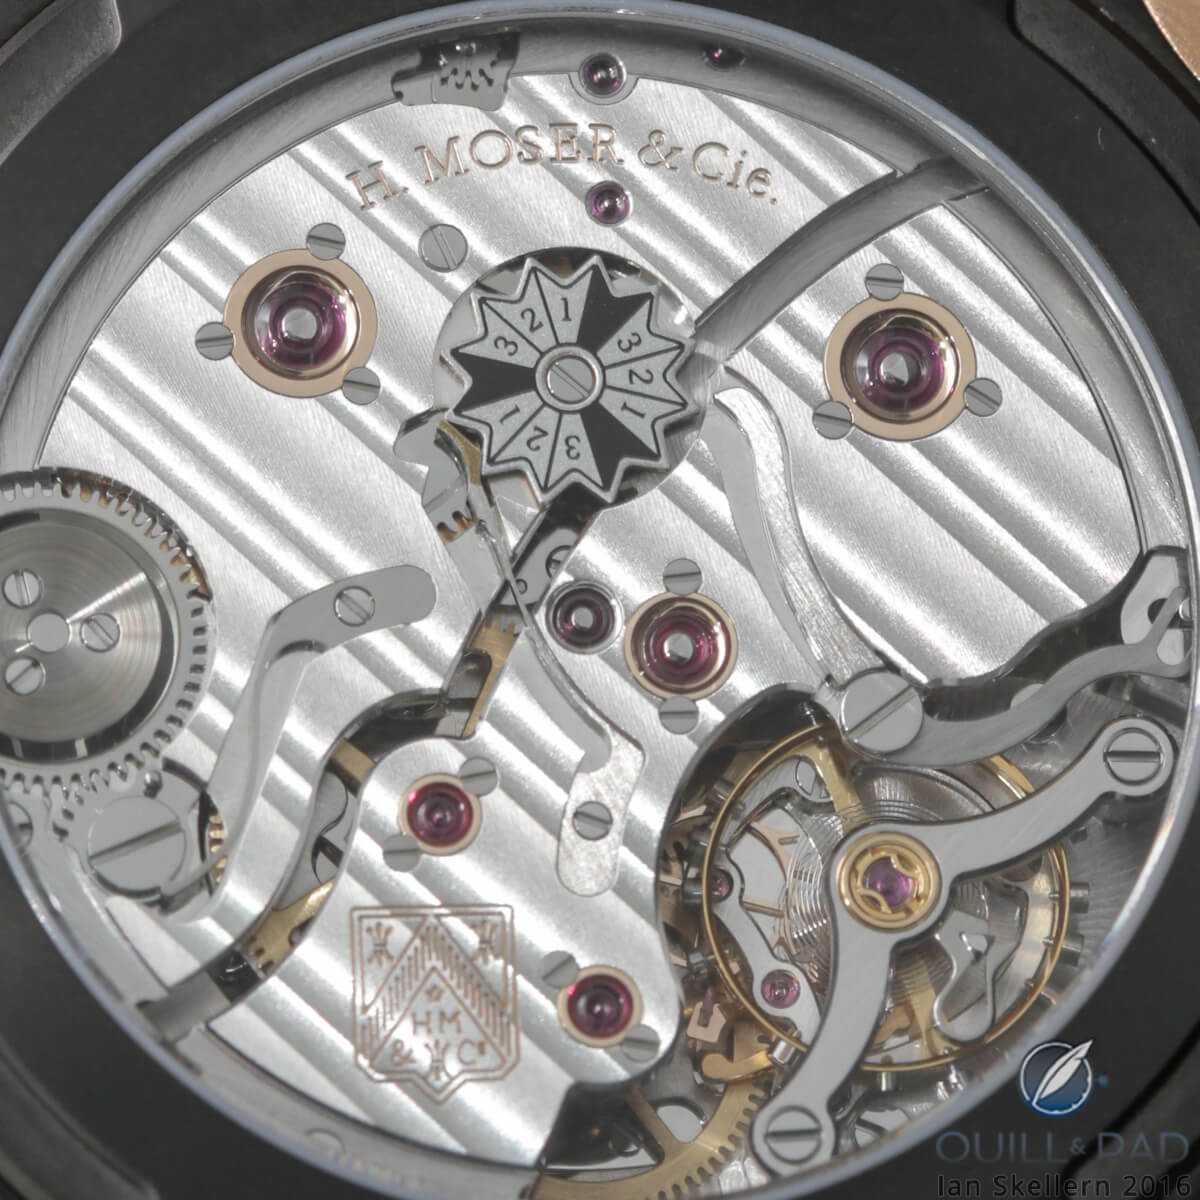 A close look at the movement of the H. Moser & Cie Endeavour Perpetual Calendar